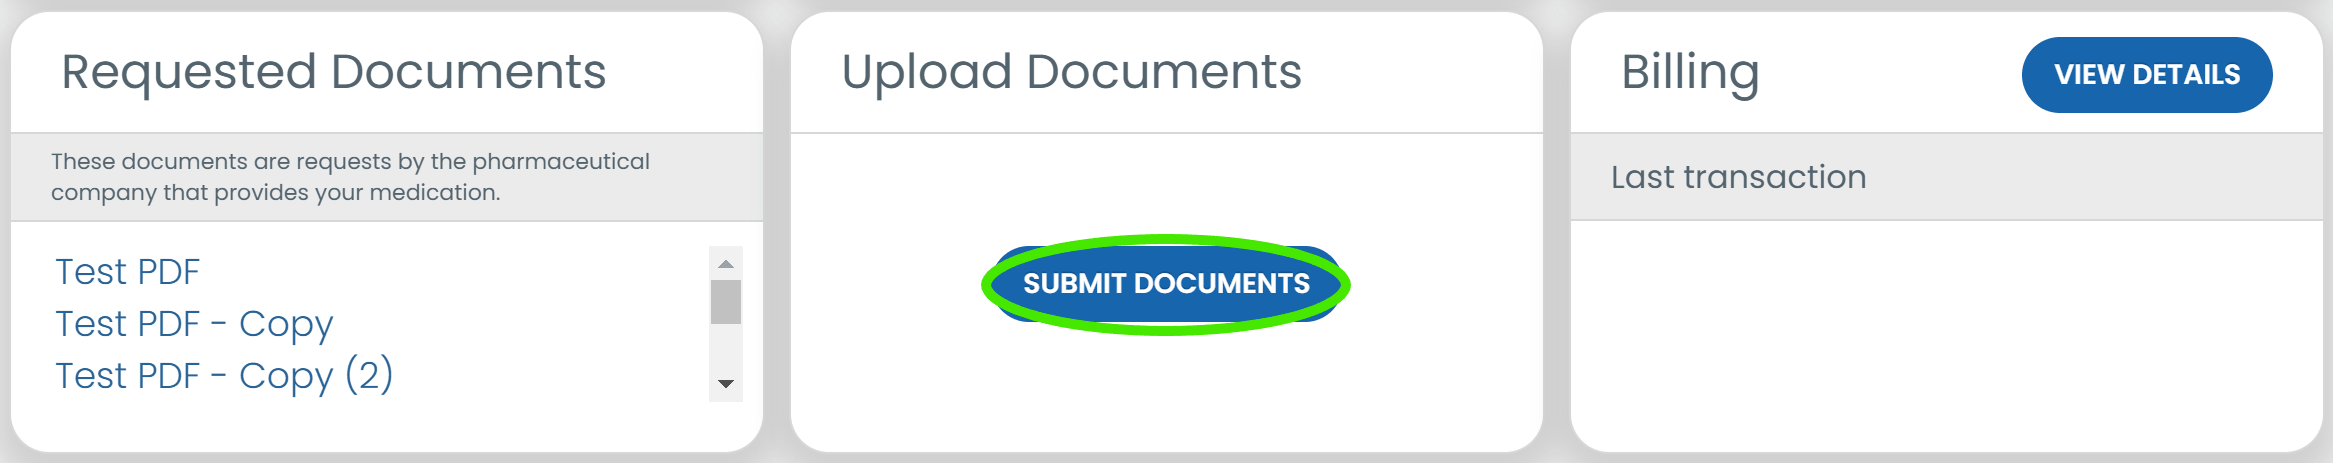 how to upload documents